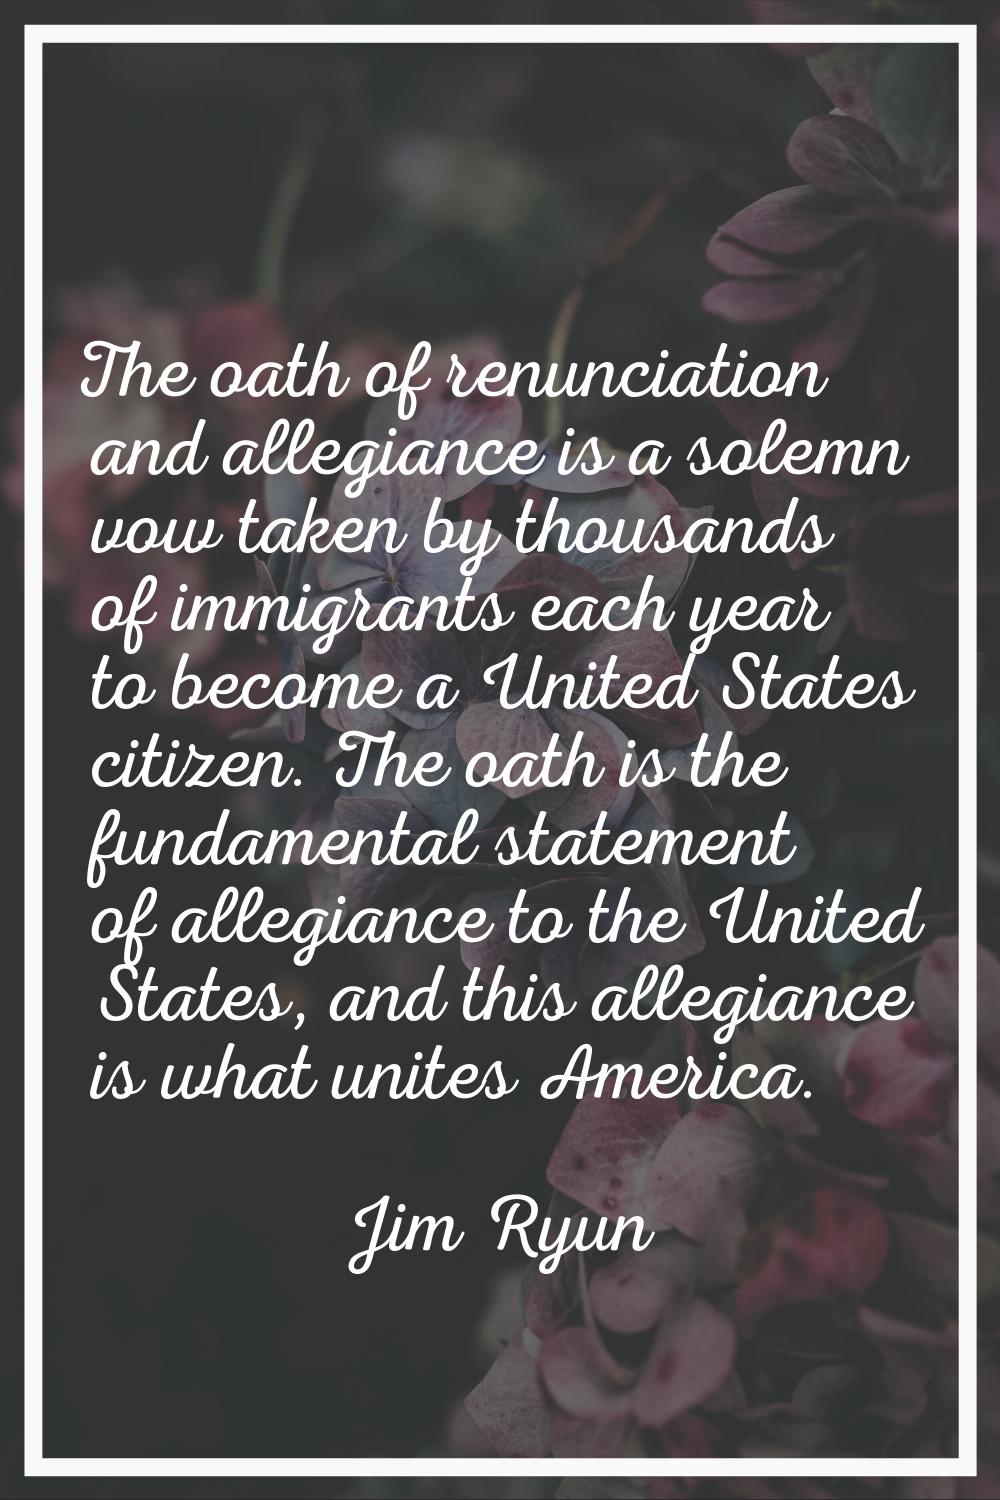 The oath of renunciation and allegiance is a solemn vow taken by thousands of immigrants each year 